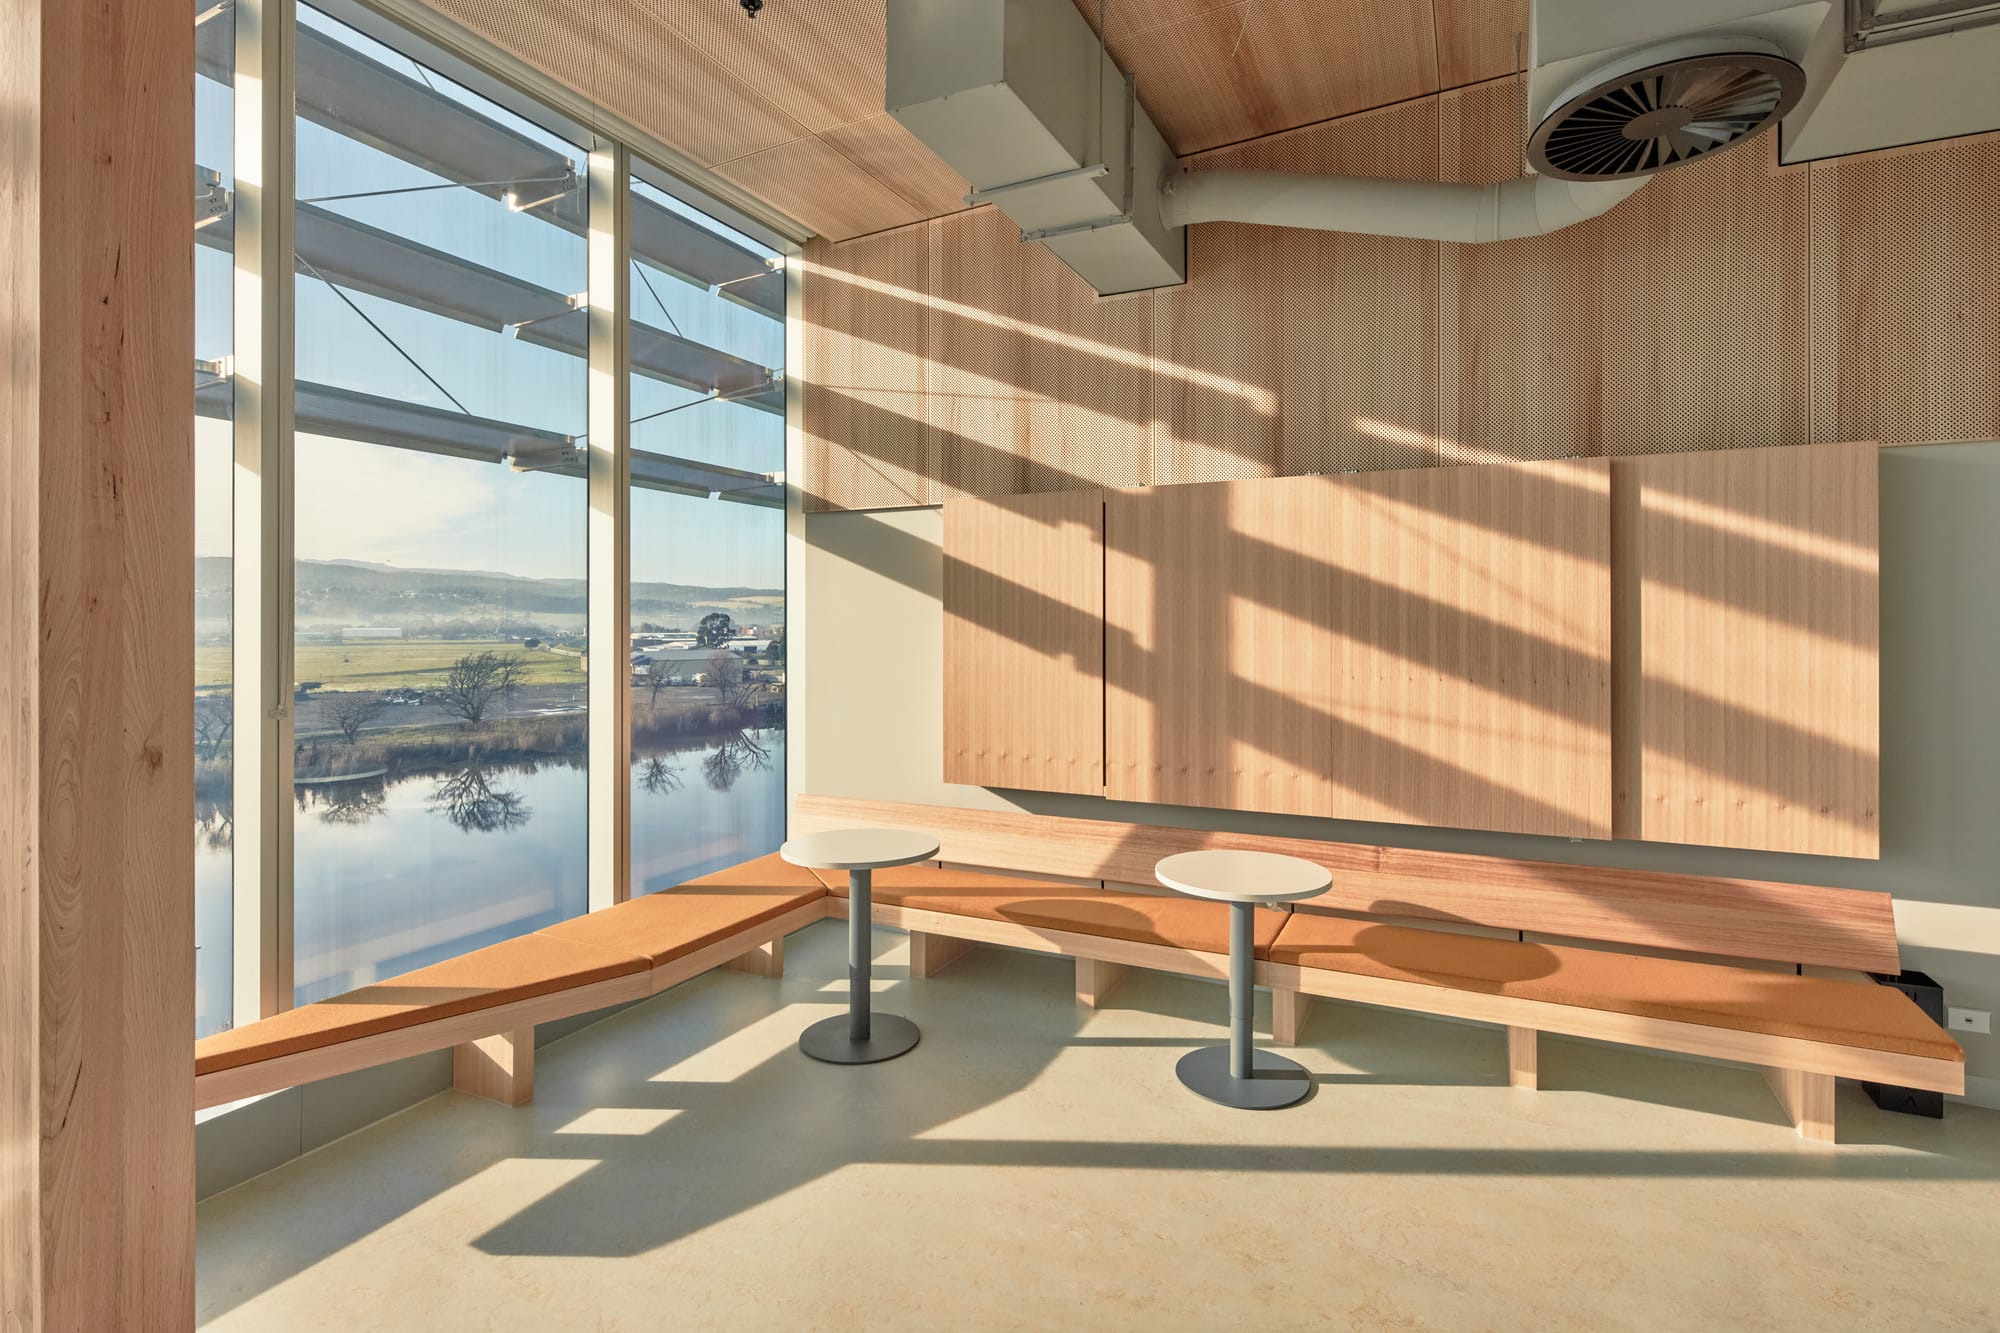 Tasmanian Timber: River's Edge. Photography: Dave Groves. A cozy nook with a large window offering a panoramic view of a serene water body and distant landscape. The room has a minimalist design with two long, wooden benches and a table. The interior is bathed in warm sunlight, casting long shadows on the wooden floor, while the peaceful exterior view suggests a harmonious blend with nature.  